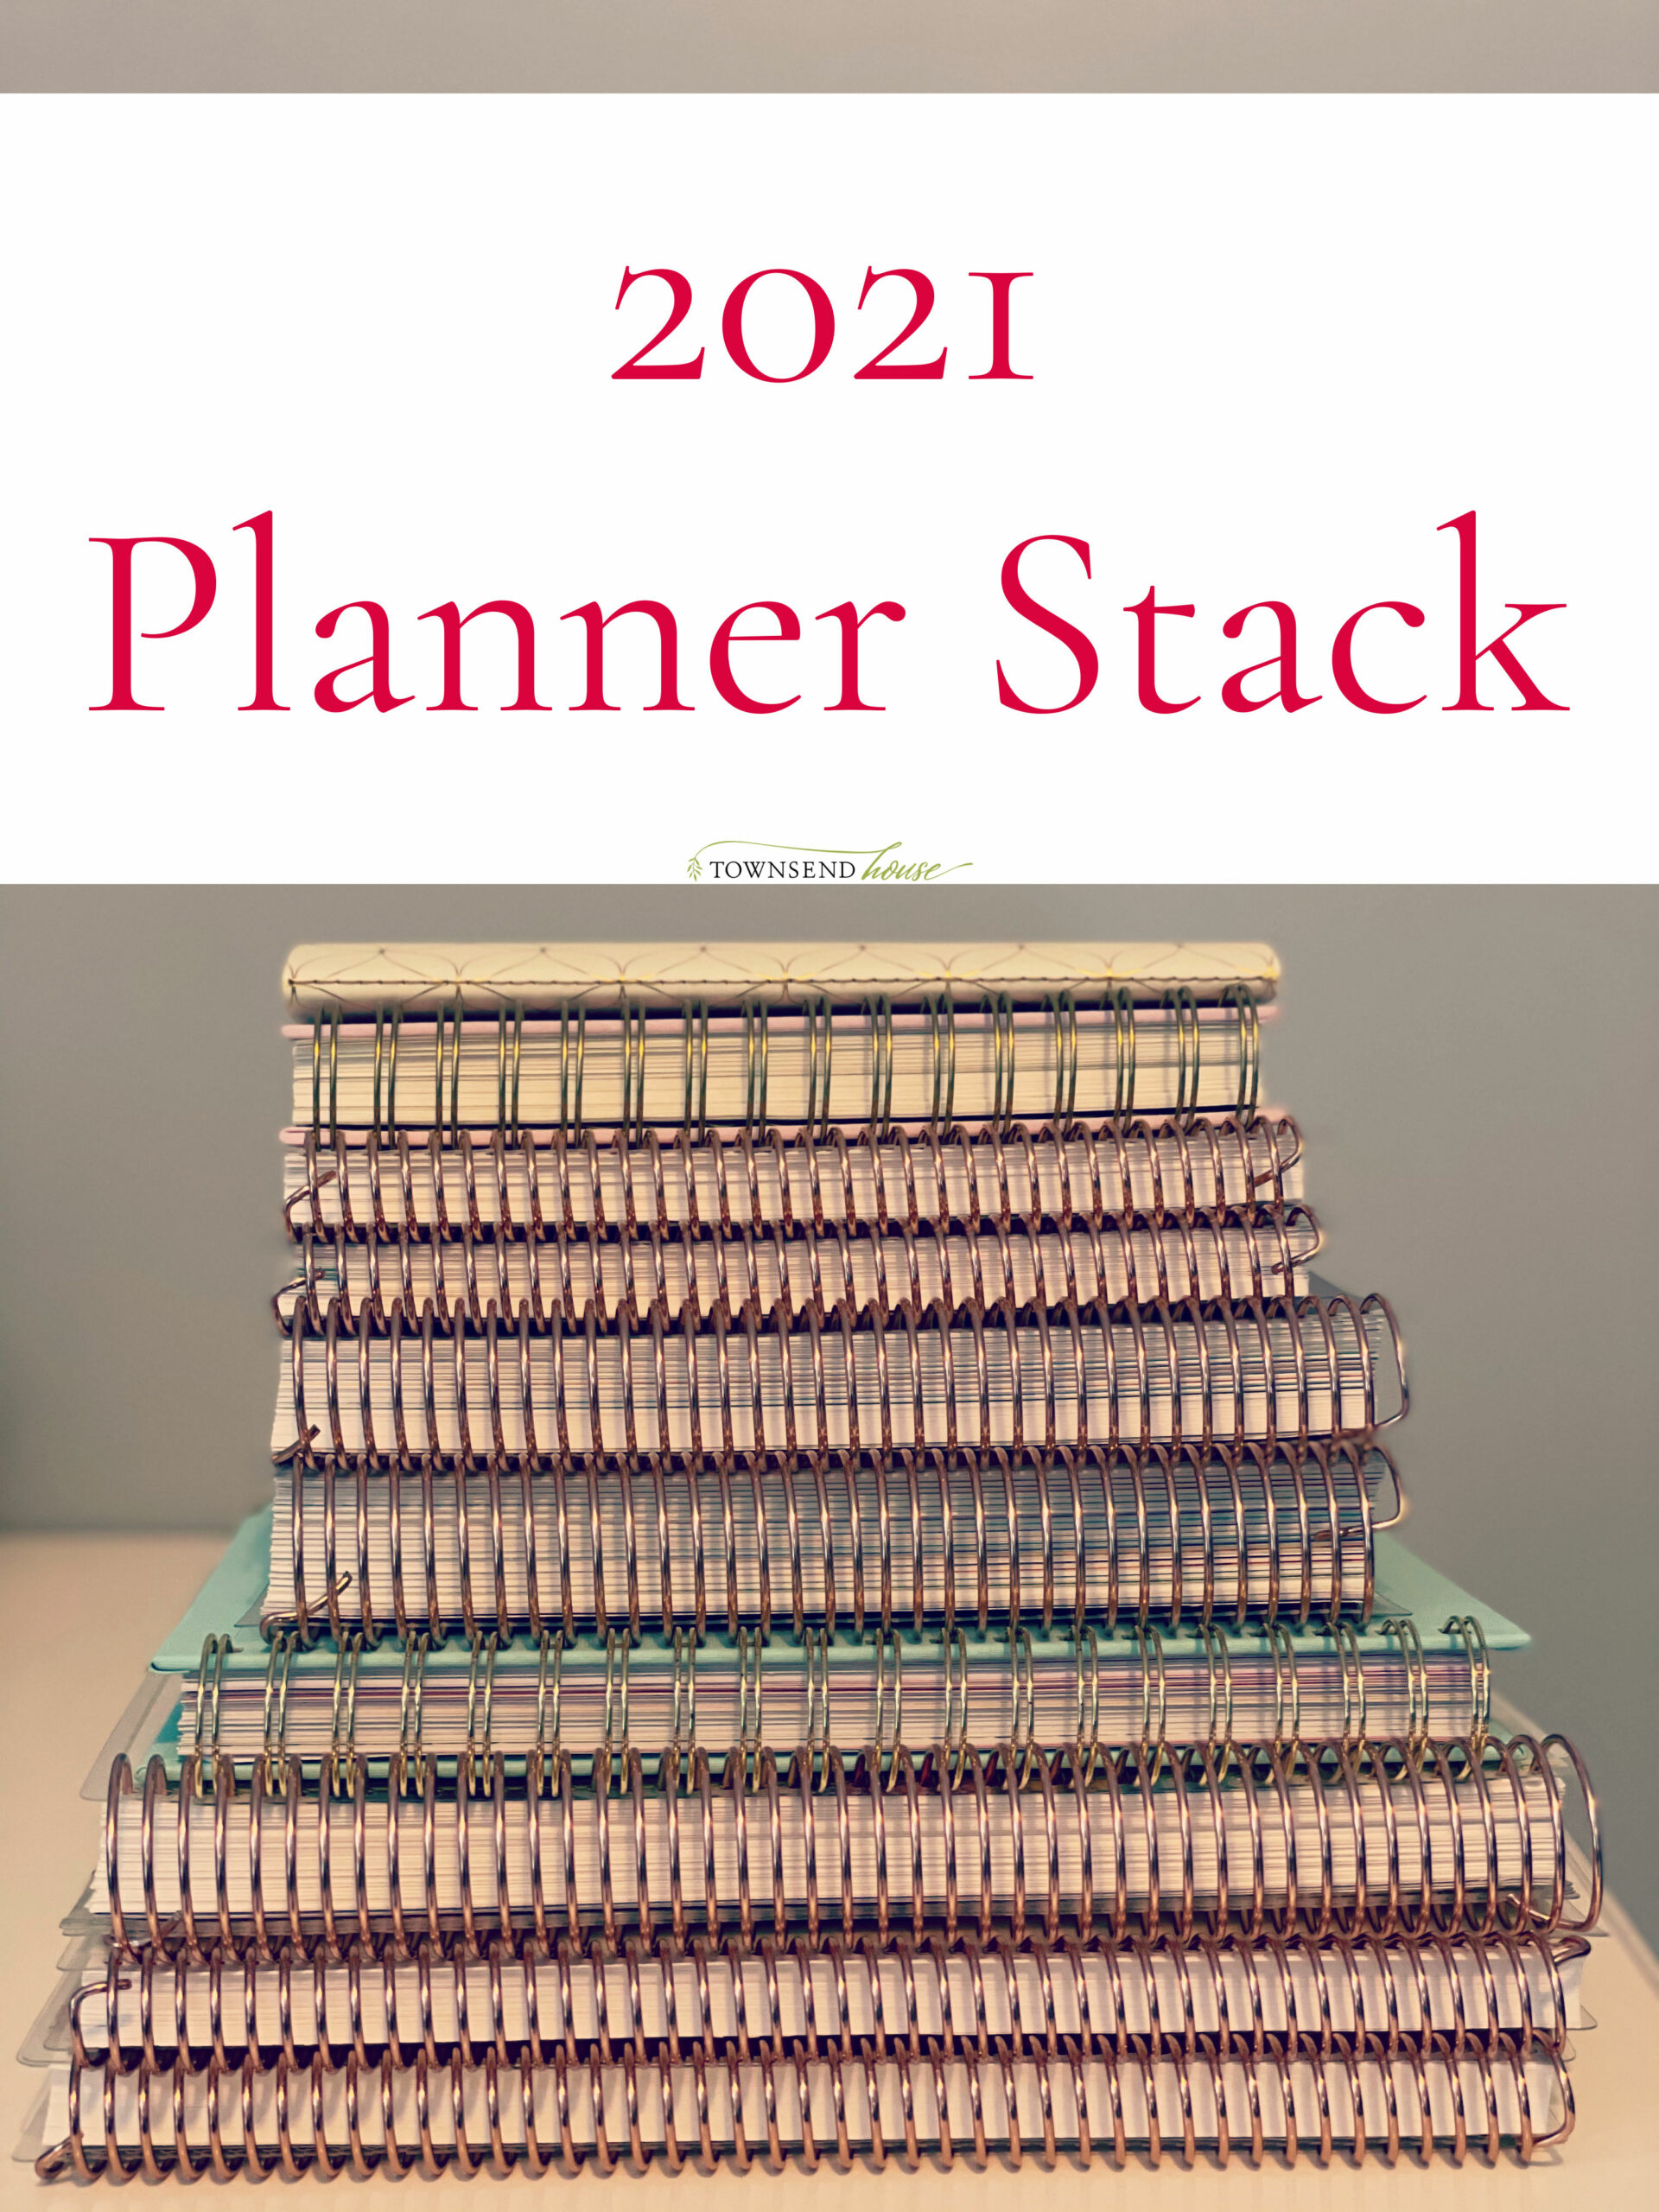 2021 Planner Lineup: How to Get Ahead